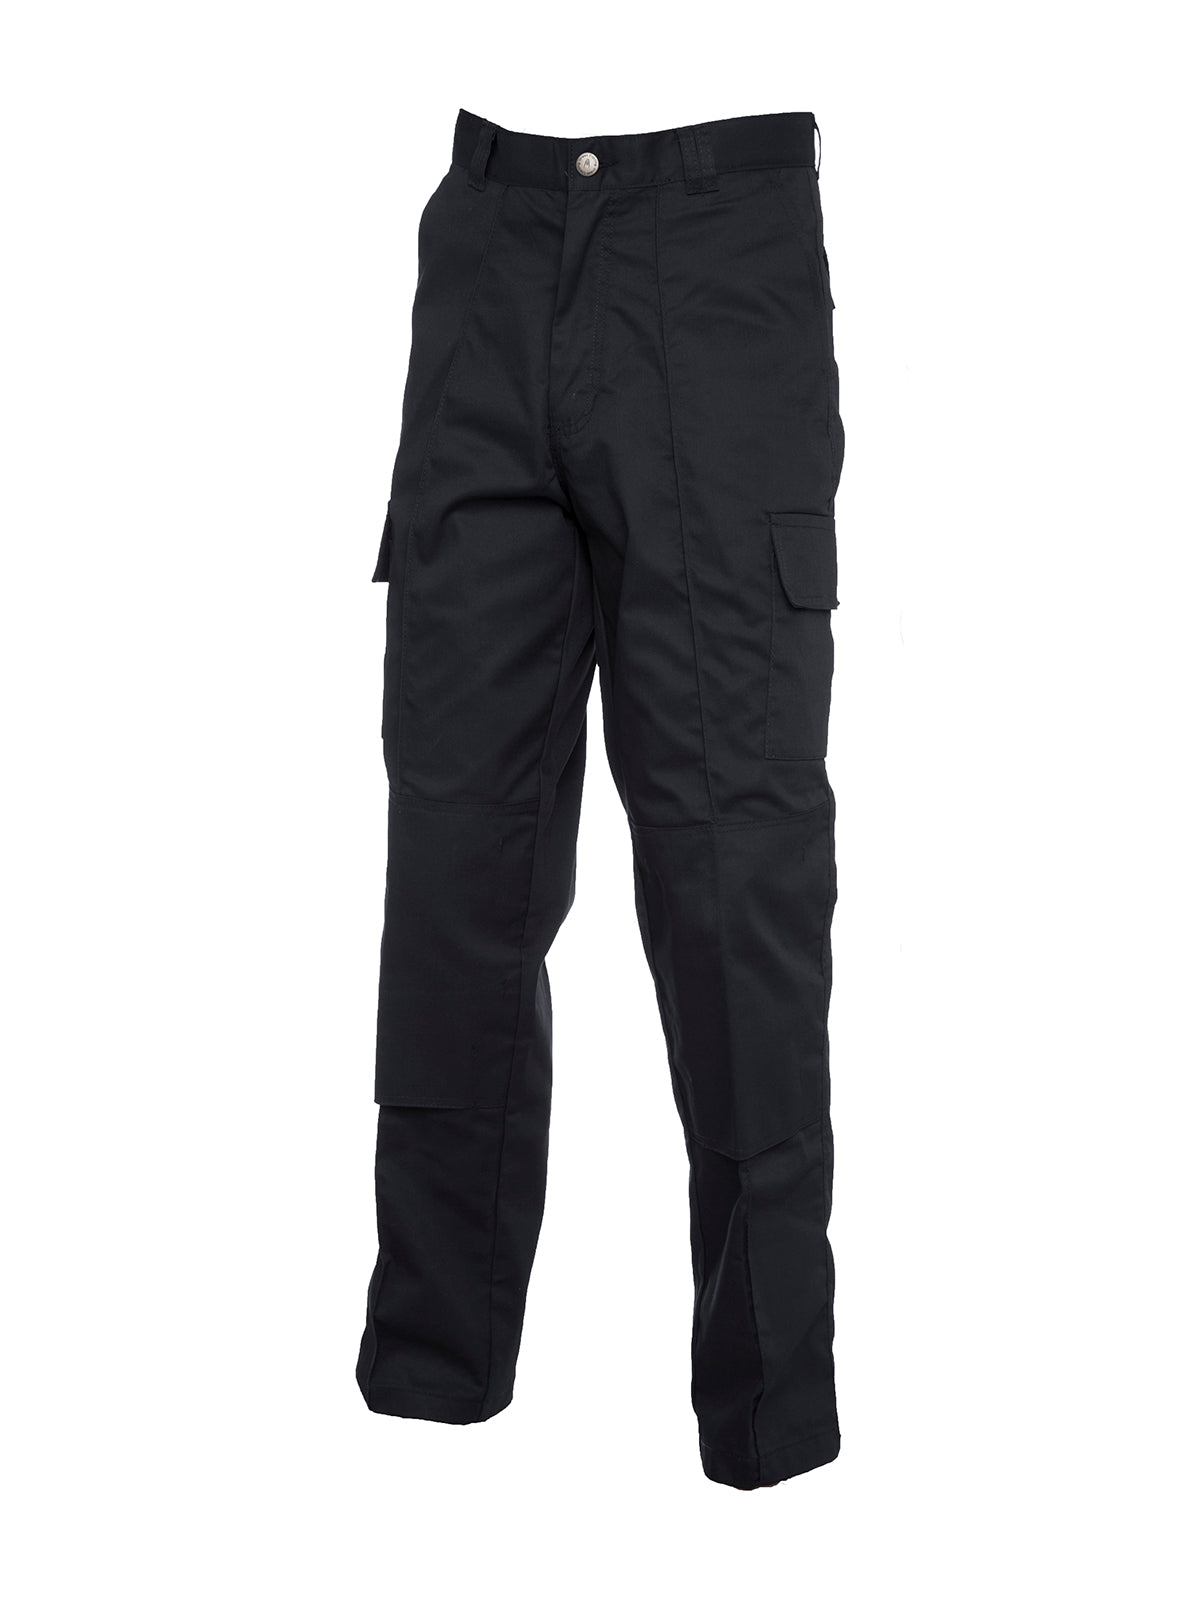 Uneek Cargo Trouser with Knee Pad Pockets Long UC904L - Black